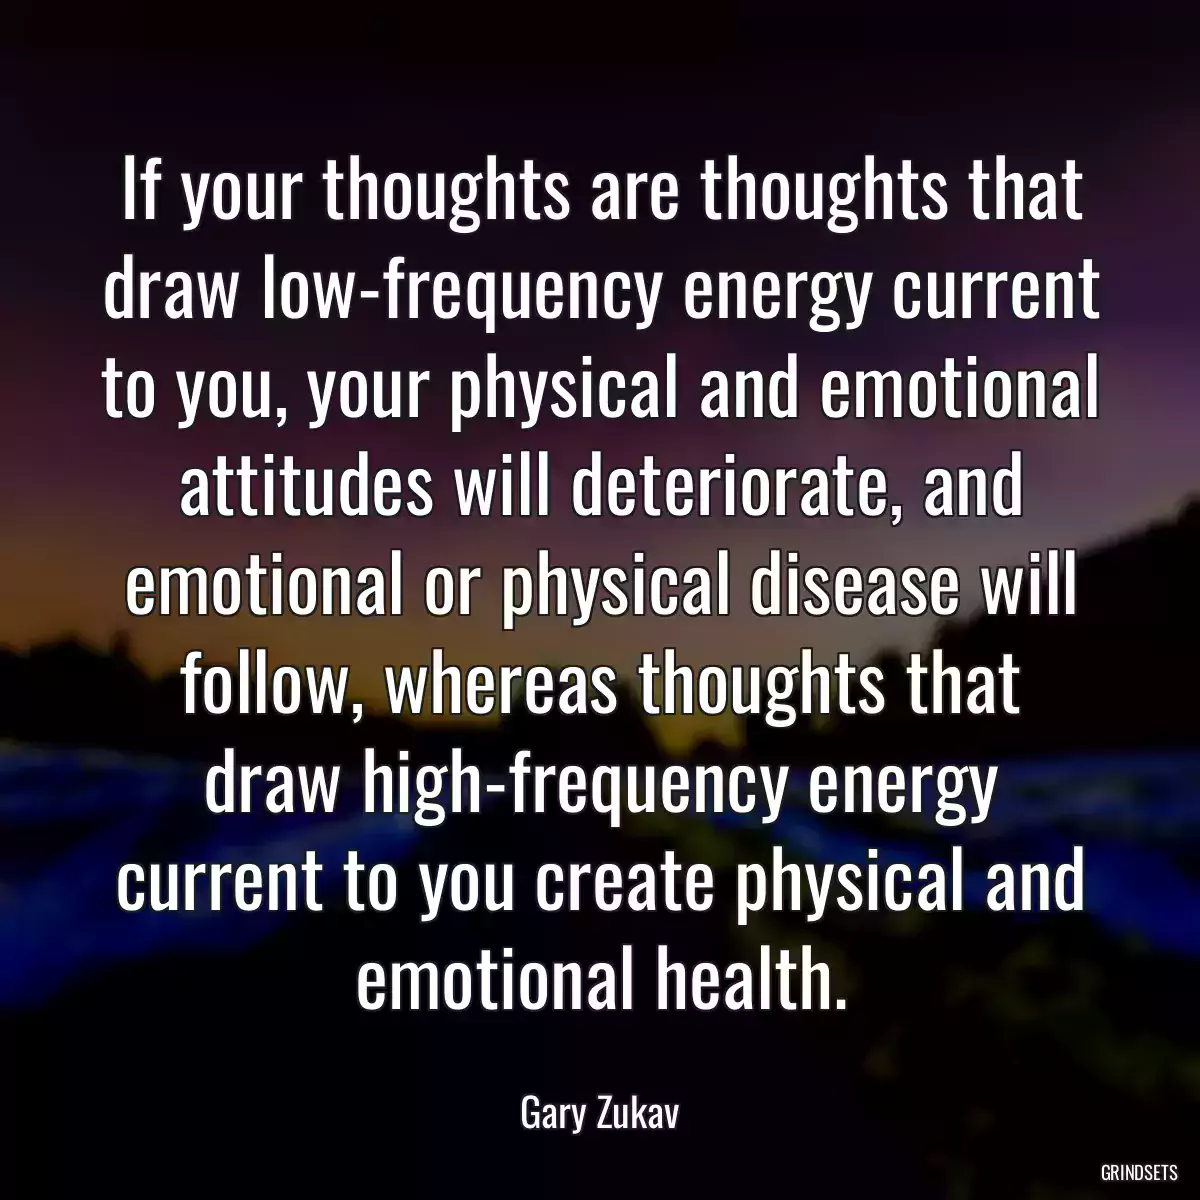 If your thoughts are thoughts that draw low-frequency energy current to you, your physical and emotional attitudes will deteriorate, and emotional or physical disease will follow, whereas thoughts that draw high-frequency energy current to you create physical and emotional health.